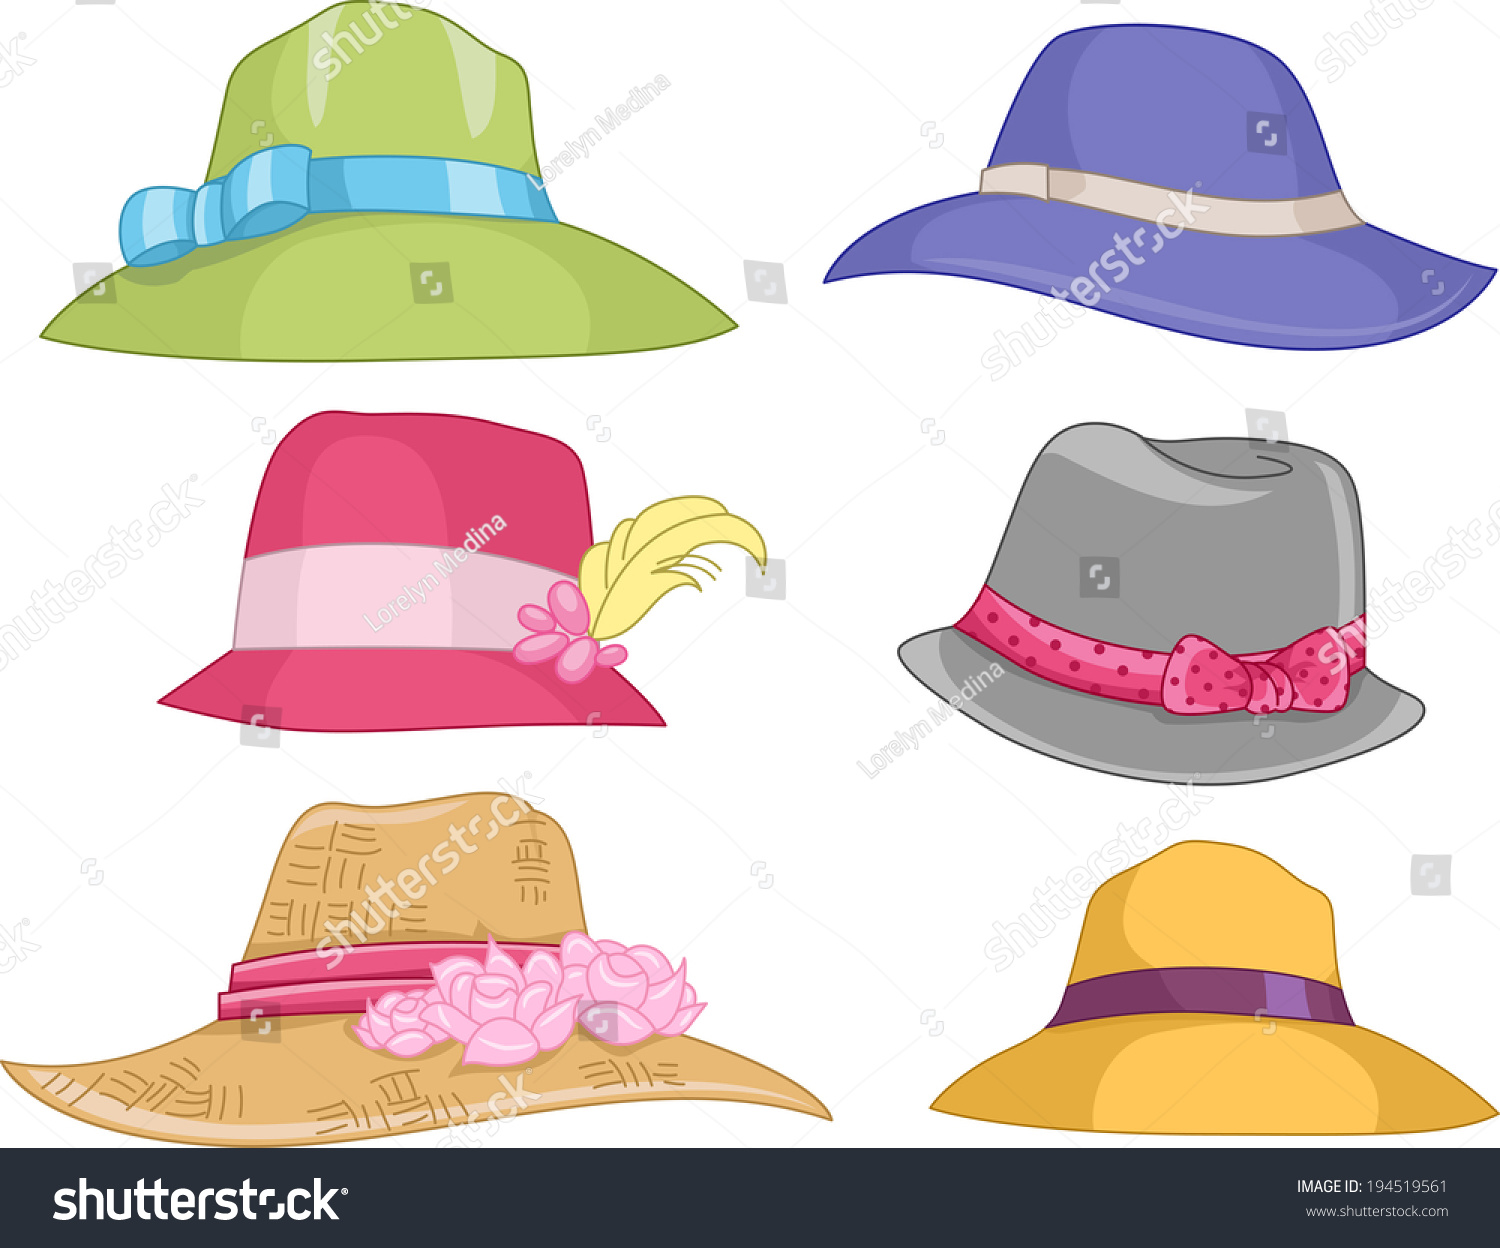 womens hat clipart - photo #30